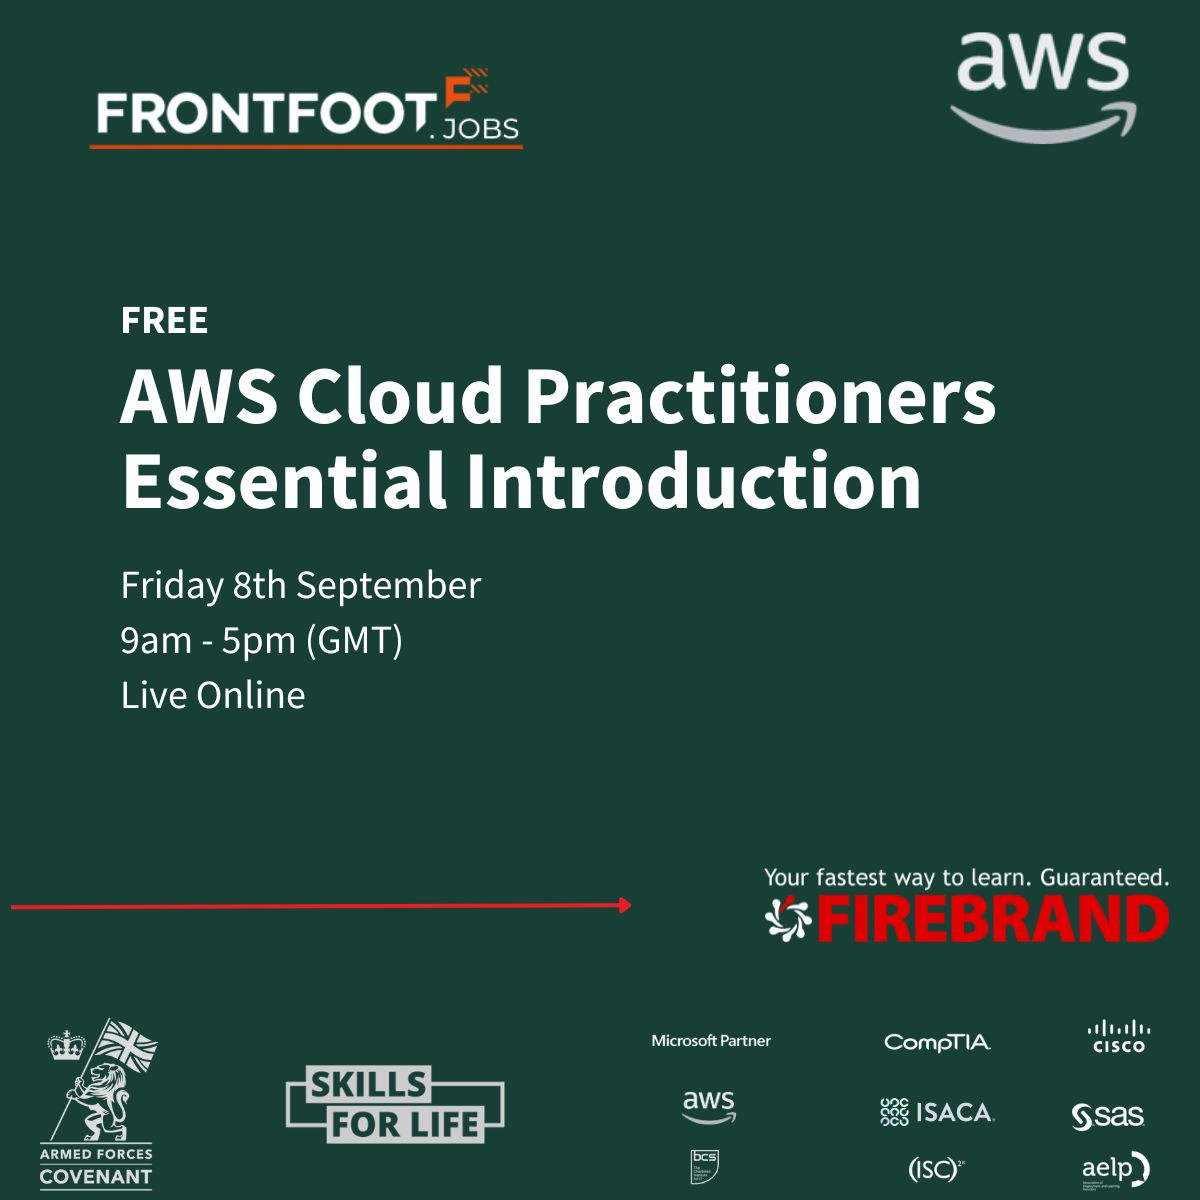 FrontFoot in partnership with Firebrand Training: FREE online AWS Cloud Practitioner Essentials Course on Friday 8th September from 9am – 5pm (GMT) Sign up: dlvr.it/SvlYRz #BeAFirebrand #AWSCloudPractitioner #AWSFreeCourse #LearnAndGrow #FutureForward #Frontfootjobs